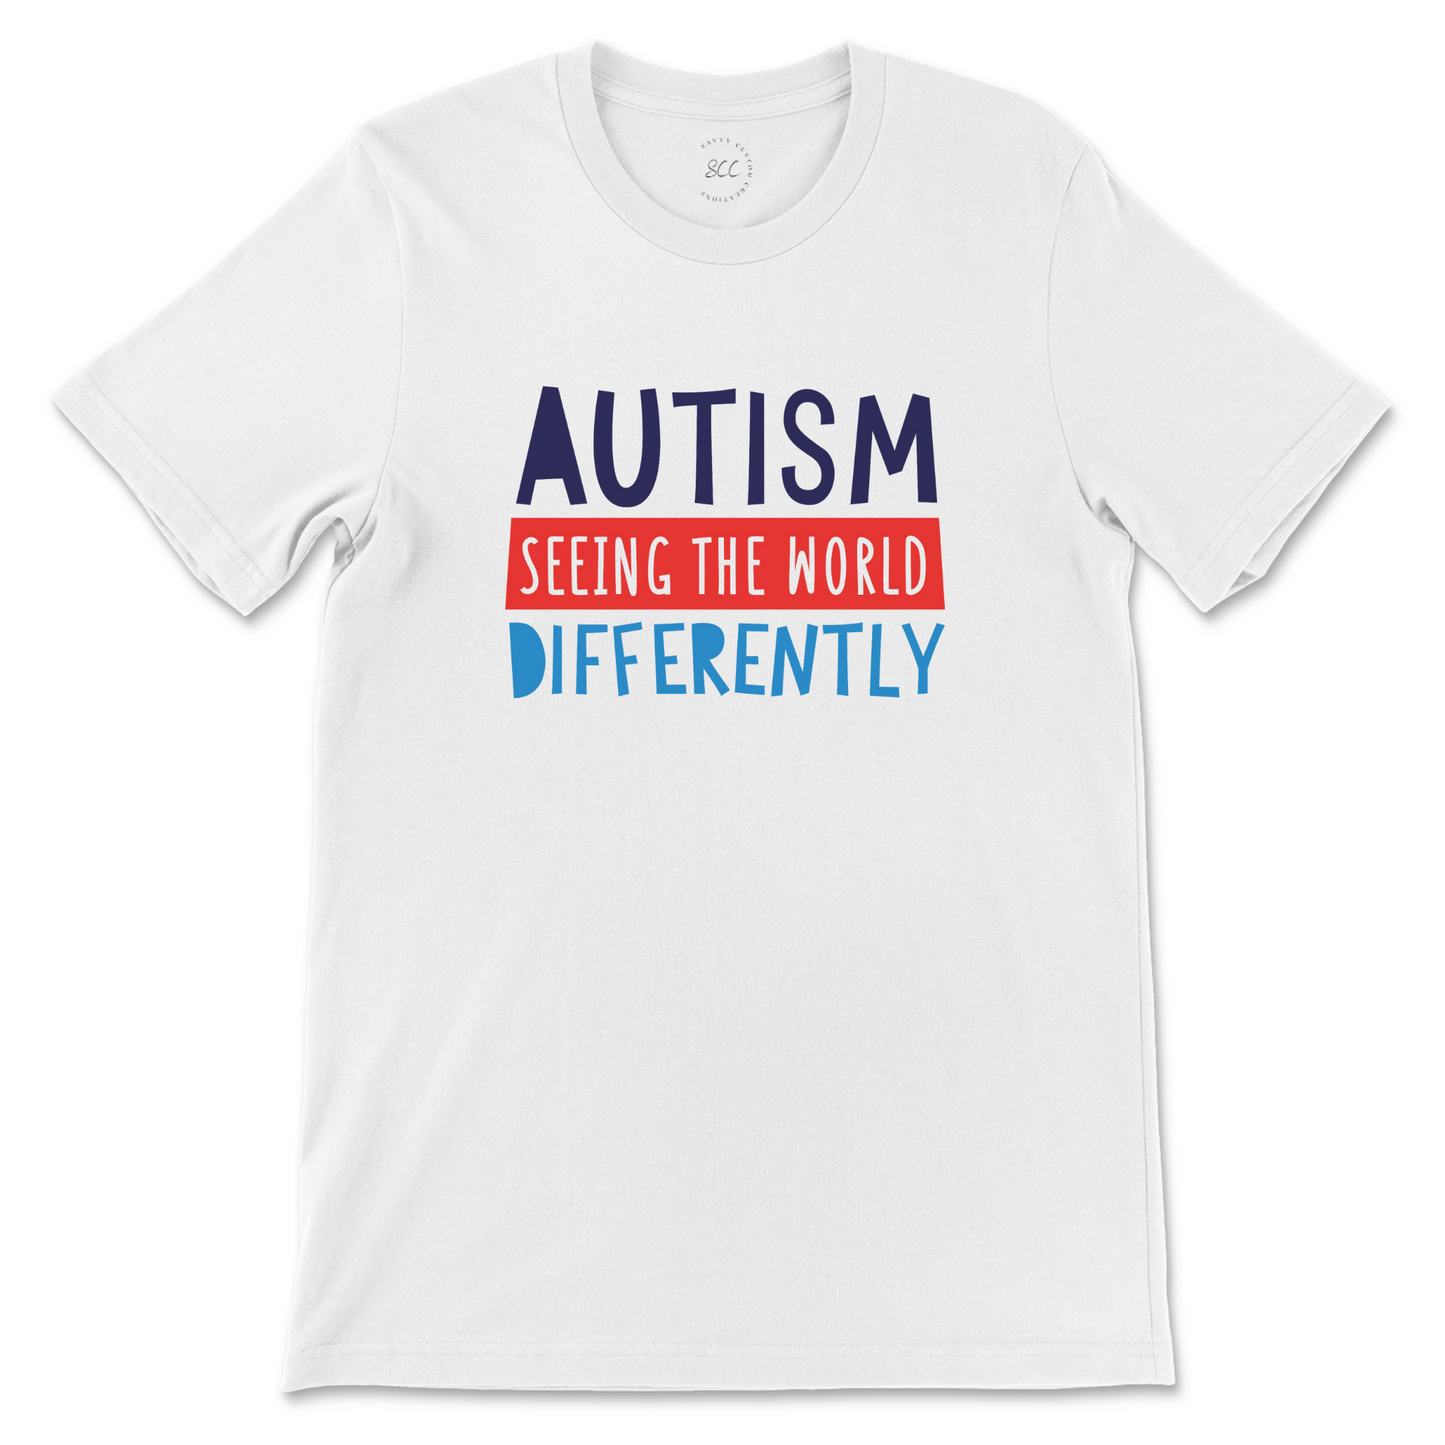 AUTISM SEEING THE WORLD DIFFERENTLY - Unisex Crewneck T-Shirt